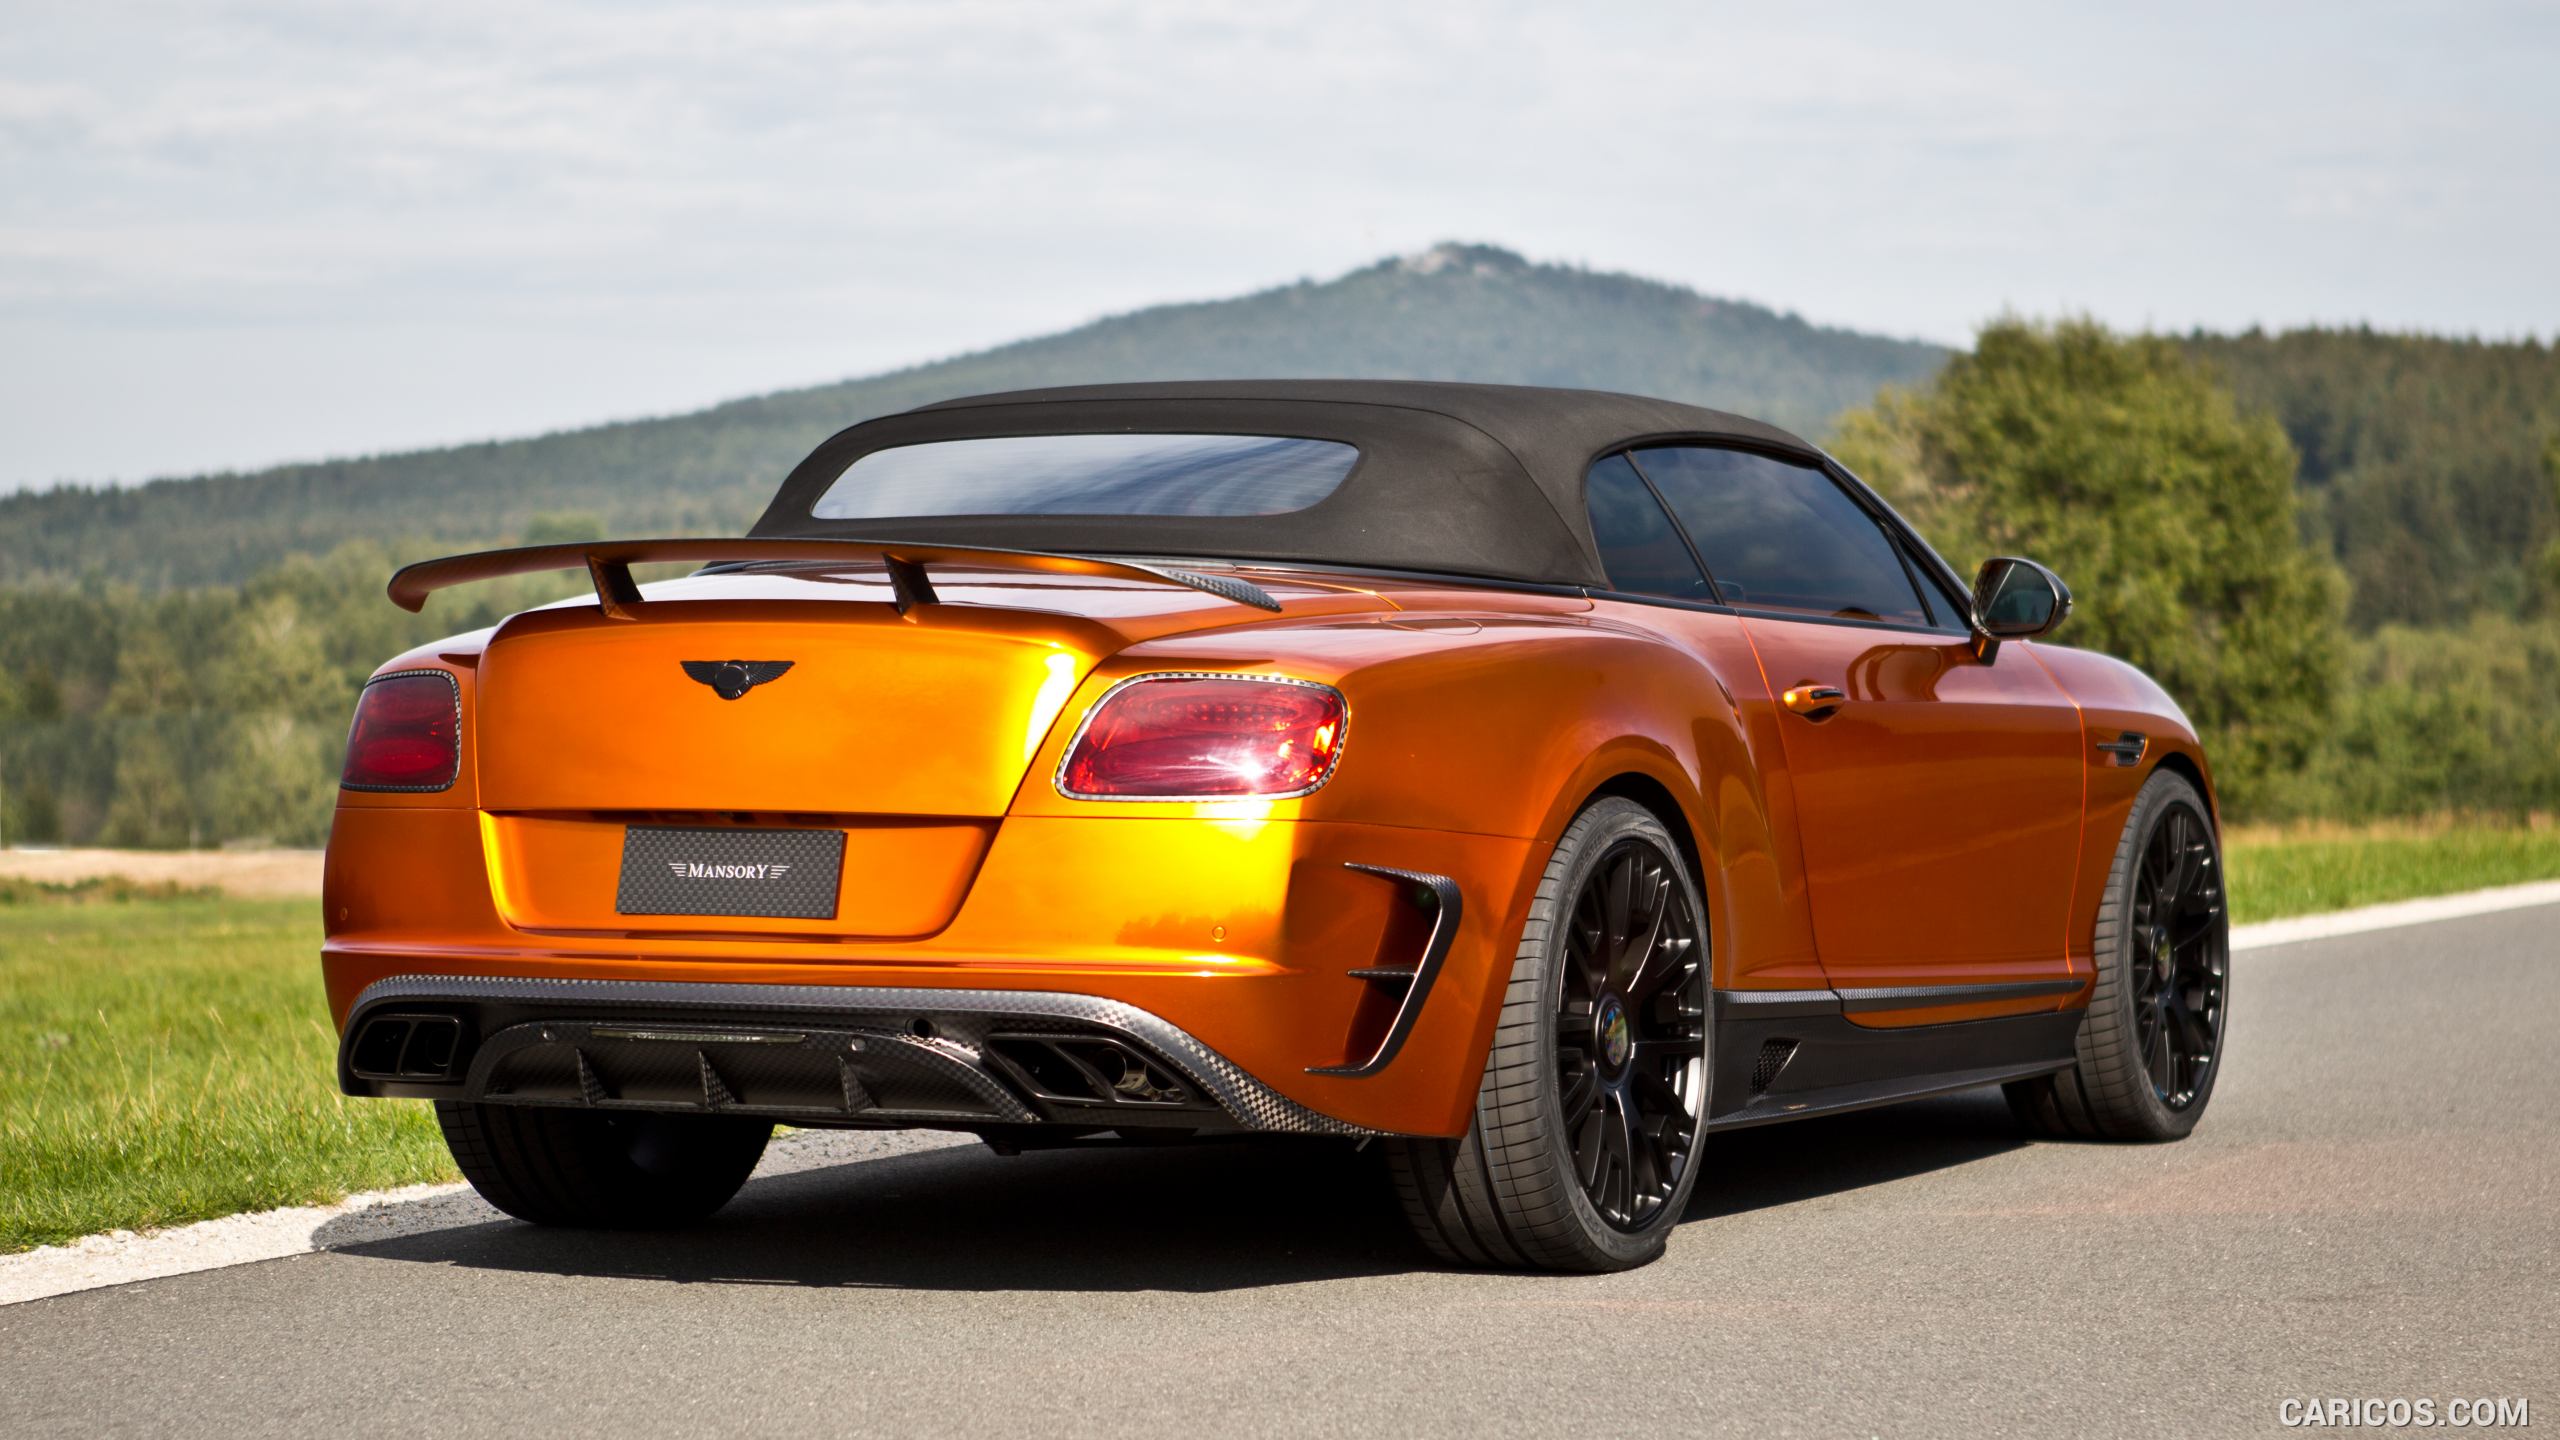 2016 MANSORY Bentley Continental GT Convertible - Rear, #4 of 13